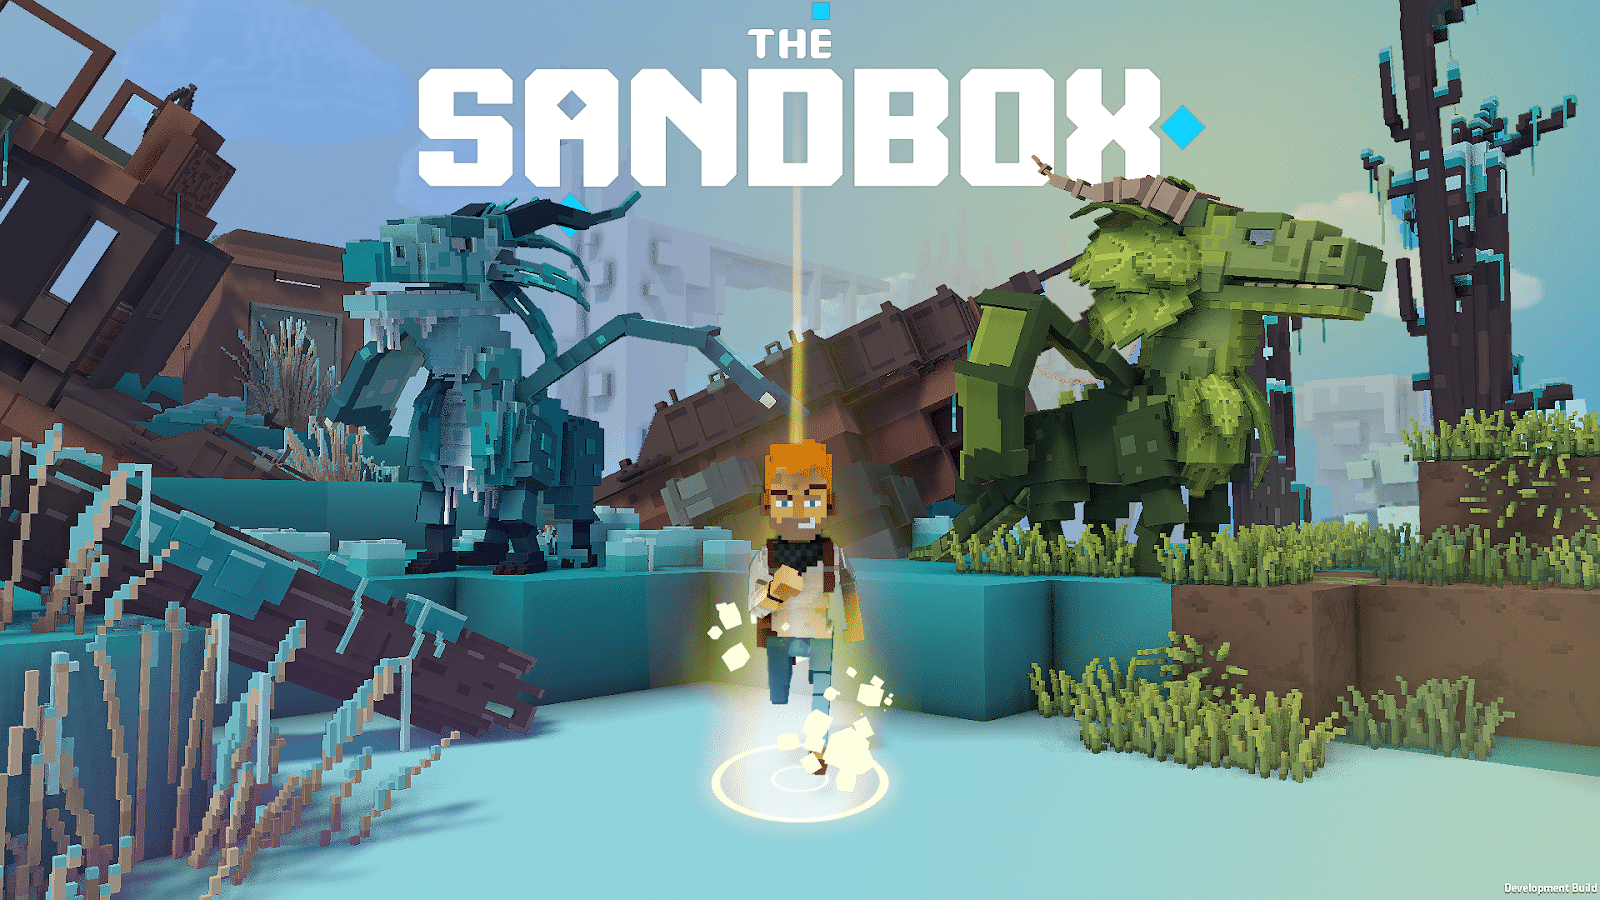 The Sandbox, one of the most popular metaverse games, is a blockchain-based platform that allows users to create, share, and monetize their gaming experiences.